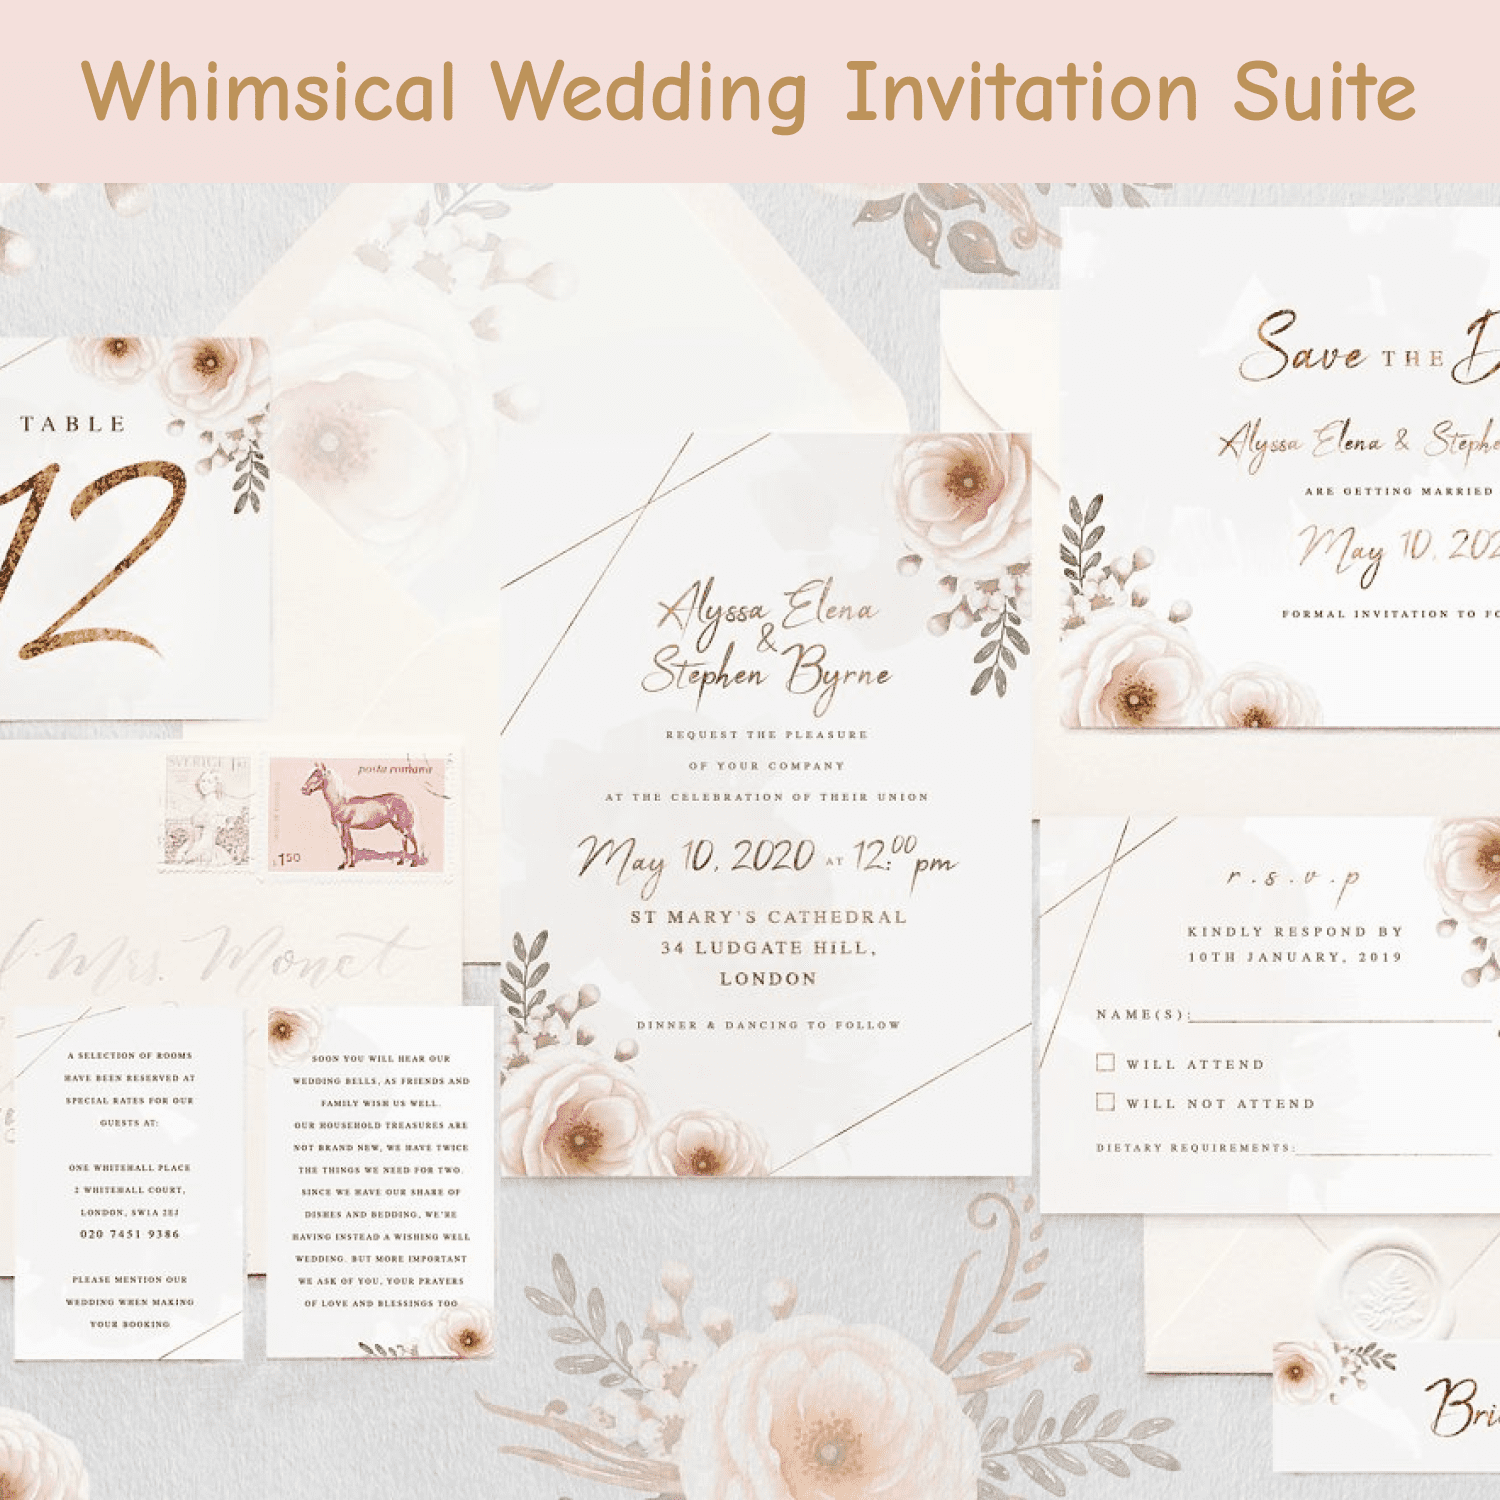 Whimsical Wedding Invitation Suite cover image.